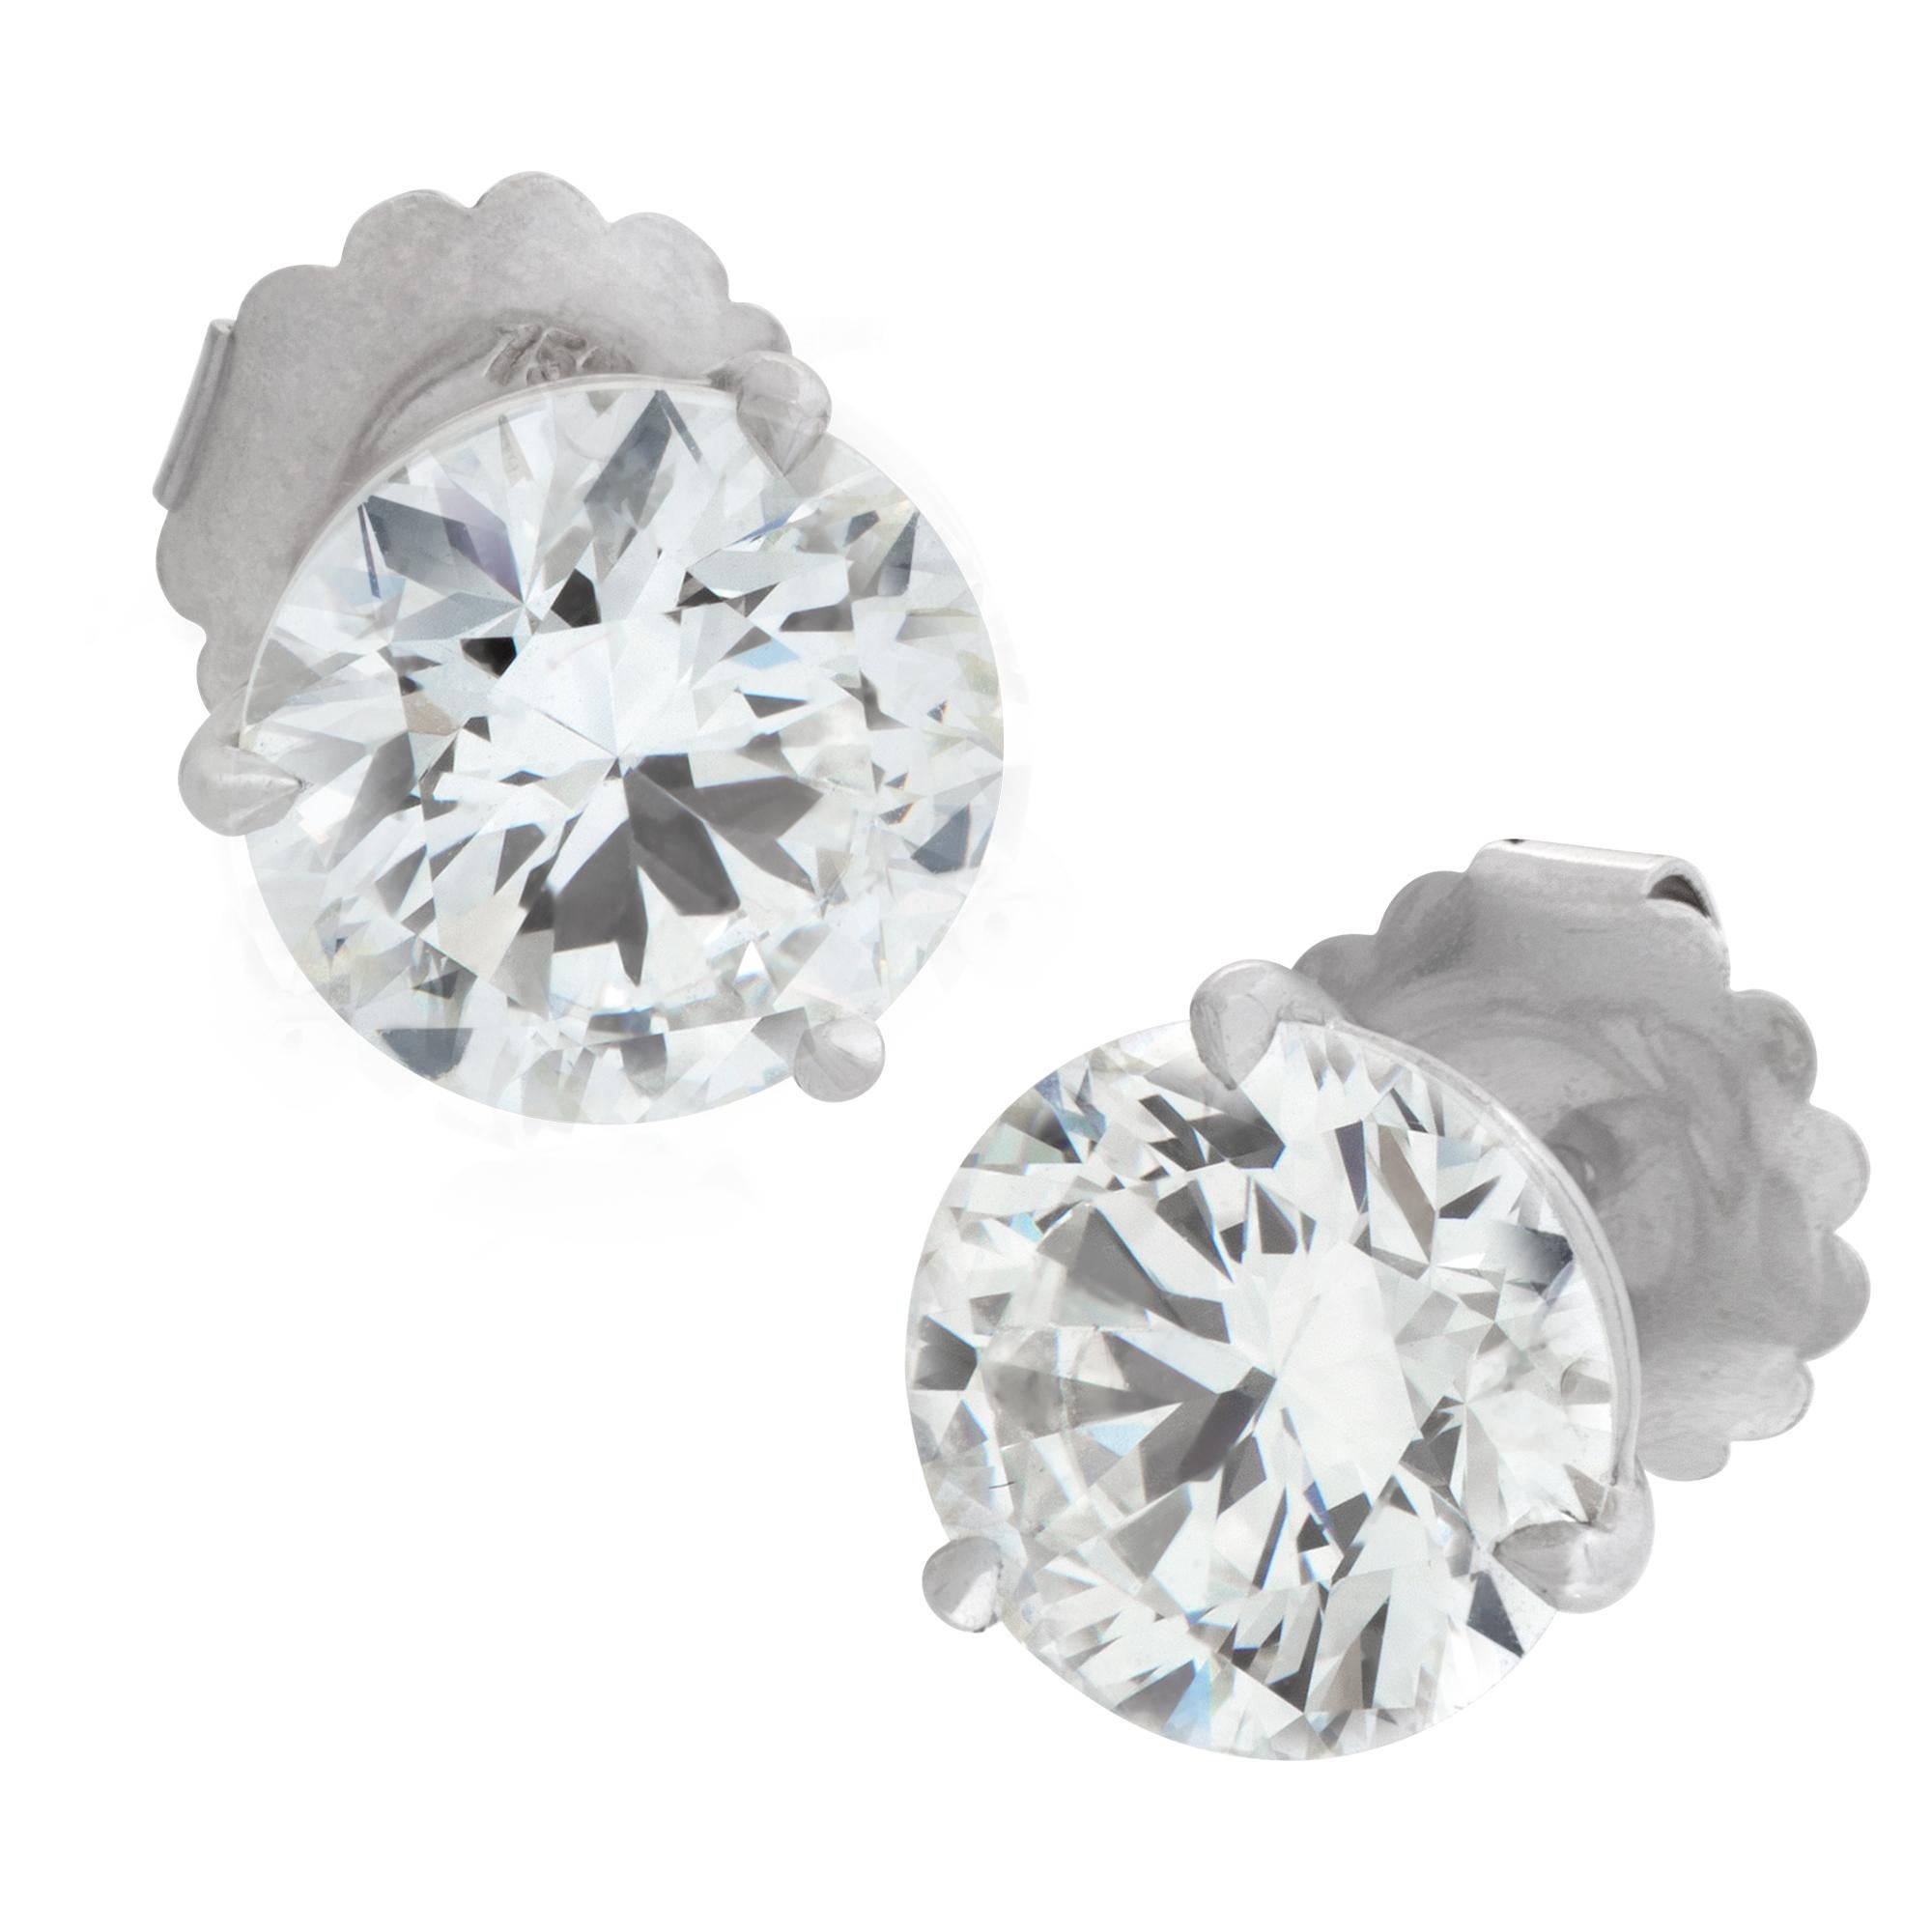 Pair of GIA certified round brilliant cut diamond stud earrings set in 18k white gold 